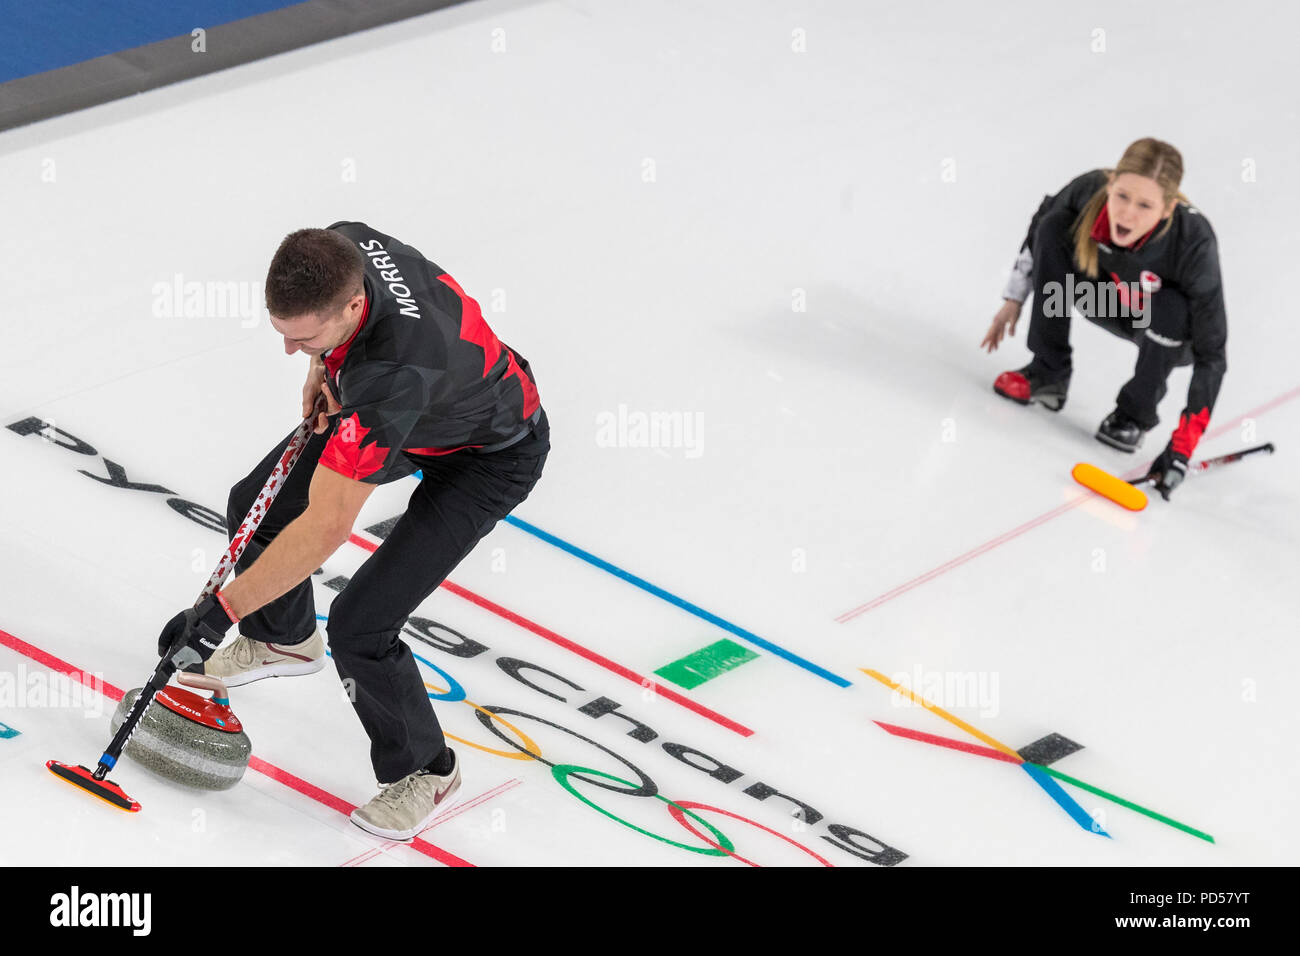 John Morris and Kaitlyn Lawes (CAN) competing in the Mixed Doubles Curling round robin at the Olympic Winter Games PyeongChang 2018 Stock Photo